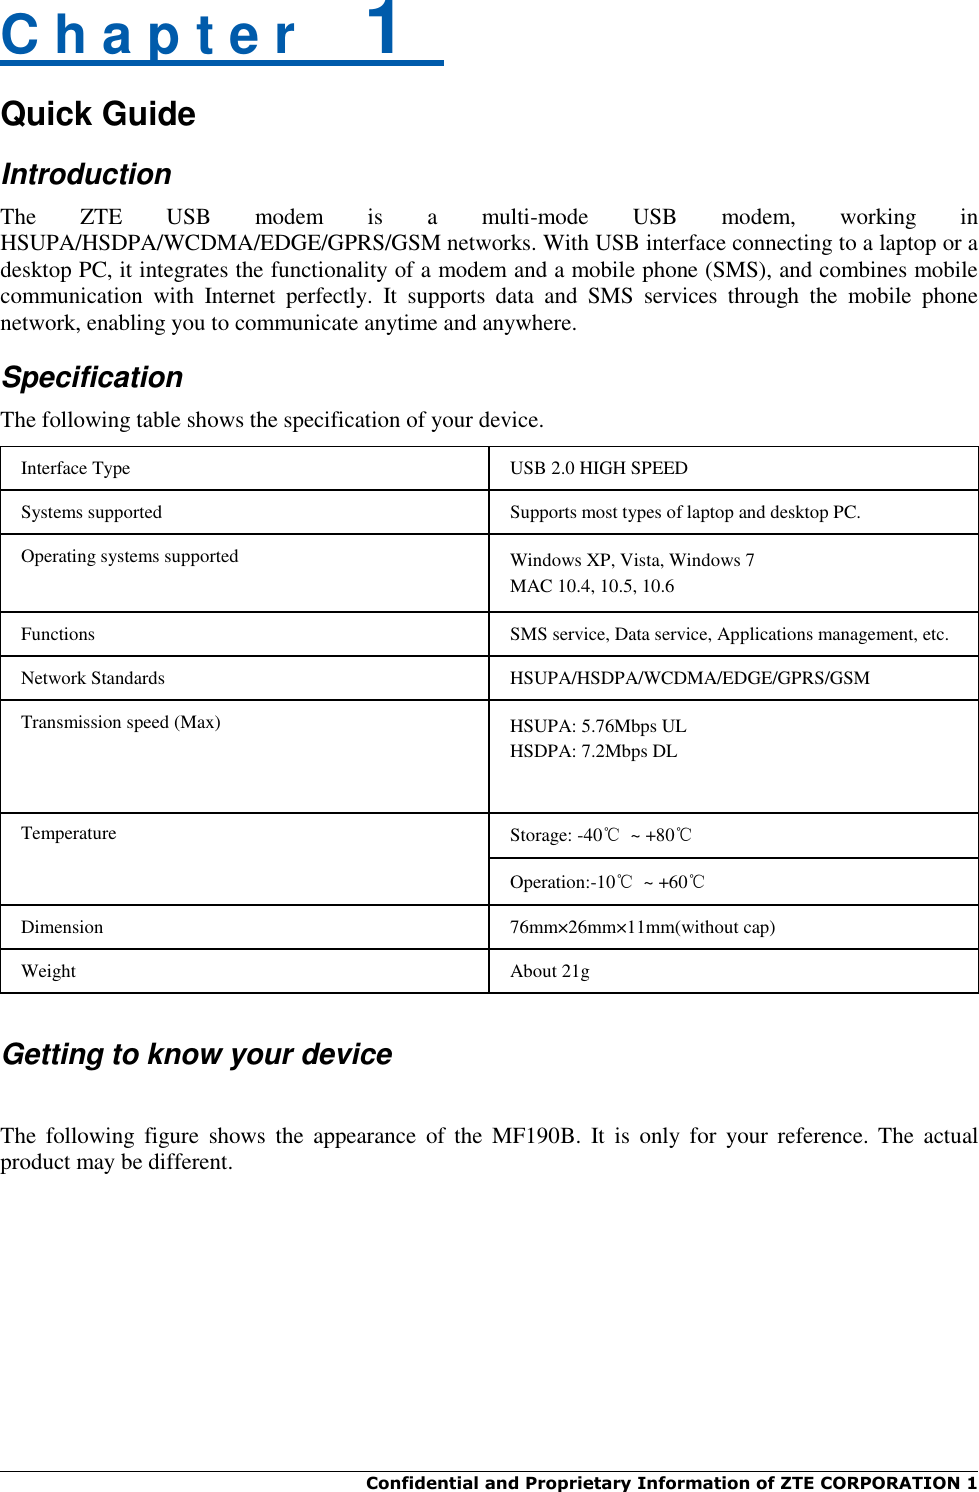  Confidential and Proprietary Information of ZTE CORPORATION 1    C h a p t e r    1   Quick Guide Introduction The  ZTE  USB  modem  is  a  multi-mode  USB  modem,  working  in HSUPA/HSDPA/WCDMA/EDGE/GPRS/GSM networks. With USB interface connecting to a laptop or a desktop PC, it integrates the functionality of a modem and a mobile phone (SMS), and combines mobile communication  with  Internet  perfectly.  It  supports  data  and  SMS  services  through  the  mobile  phone network, enabling you to communicate anytime and anywhere. Specification The following table shows the specification of your device. Interface Type USB 2.0 HIGH SPEED Systems supported Supports most types of laptop and desktop PC. Operating systems supported Windows XP, Vista, Windows 7 MAC 10.4, 10.5, 10.6 Functions SMS service, Data service, Applications management, etc. Network Standards HSUPA/HSDPA/WCDMA/EDGE/GPRS/GSM Transmission speed (Max) HSUPA: 5.76Mbps UL HSDPA: 7.2Mbps DL Temperature Storage: -40℃  ~ +80℃ Operation:-10℃  ~ +60℃ Dimension 76mm×26mm×11mm(without cap) Weight About 21g   Getting to know your device  The  following  figure  shows  the  appearance  of  the  MF190B.  It  is  only  for  your  reference.  The  actual product may be different. 